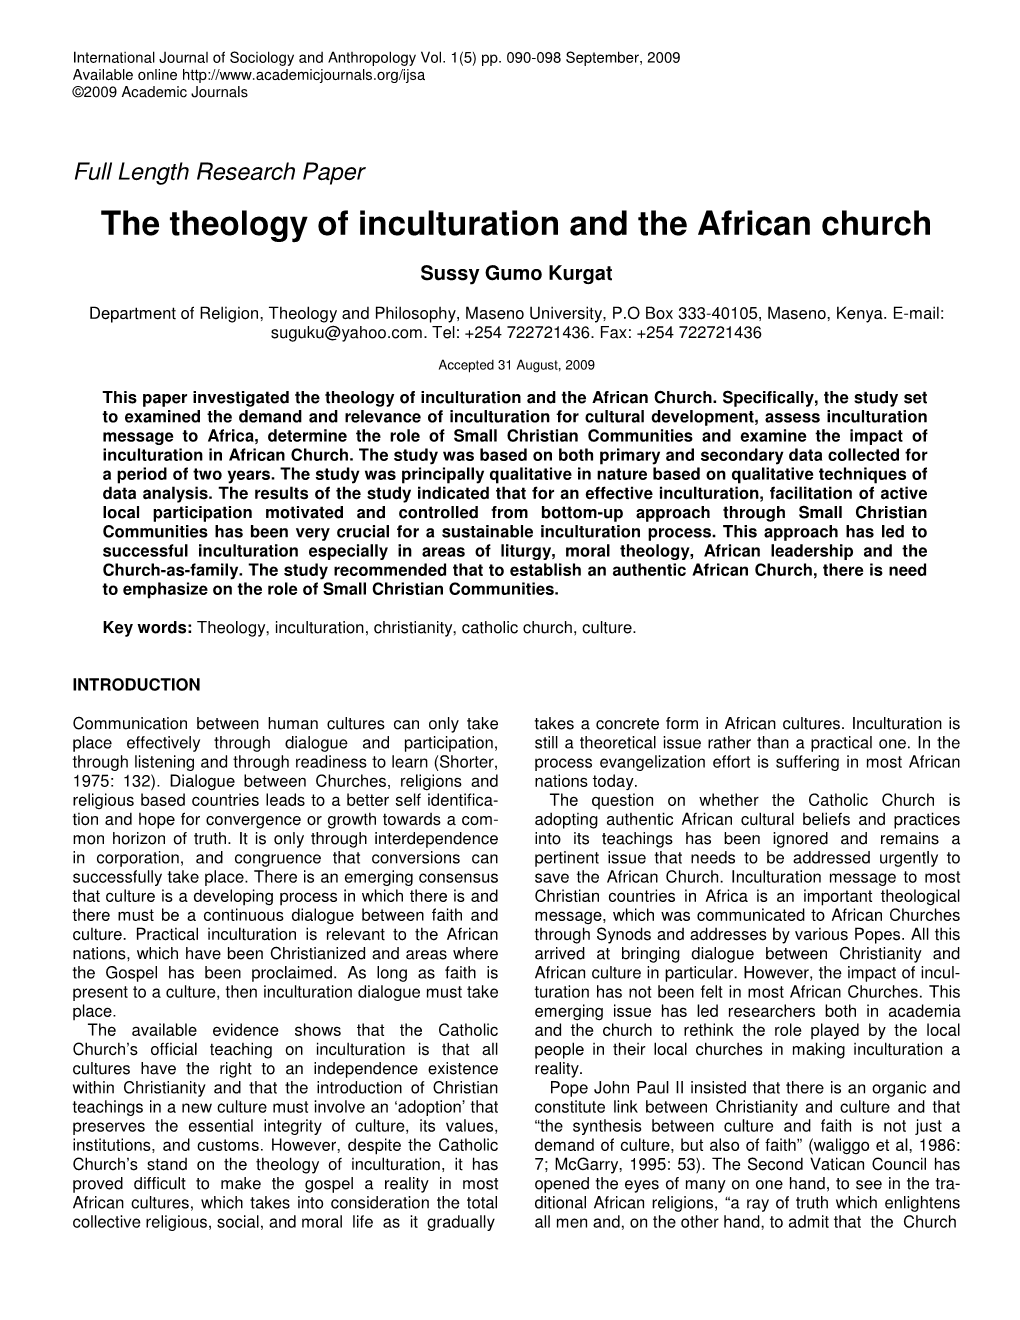 The Theology of Inculturation and the African Church